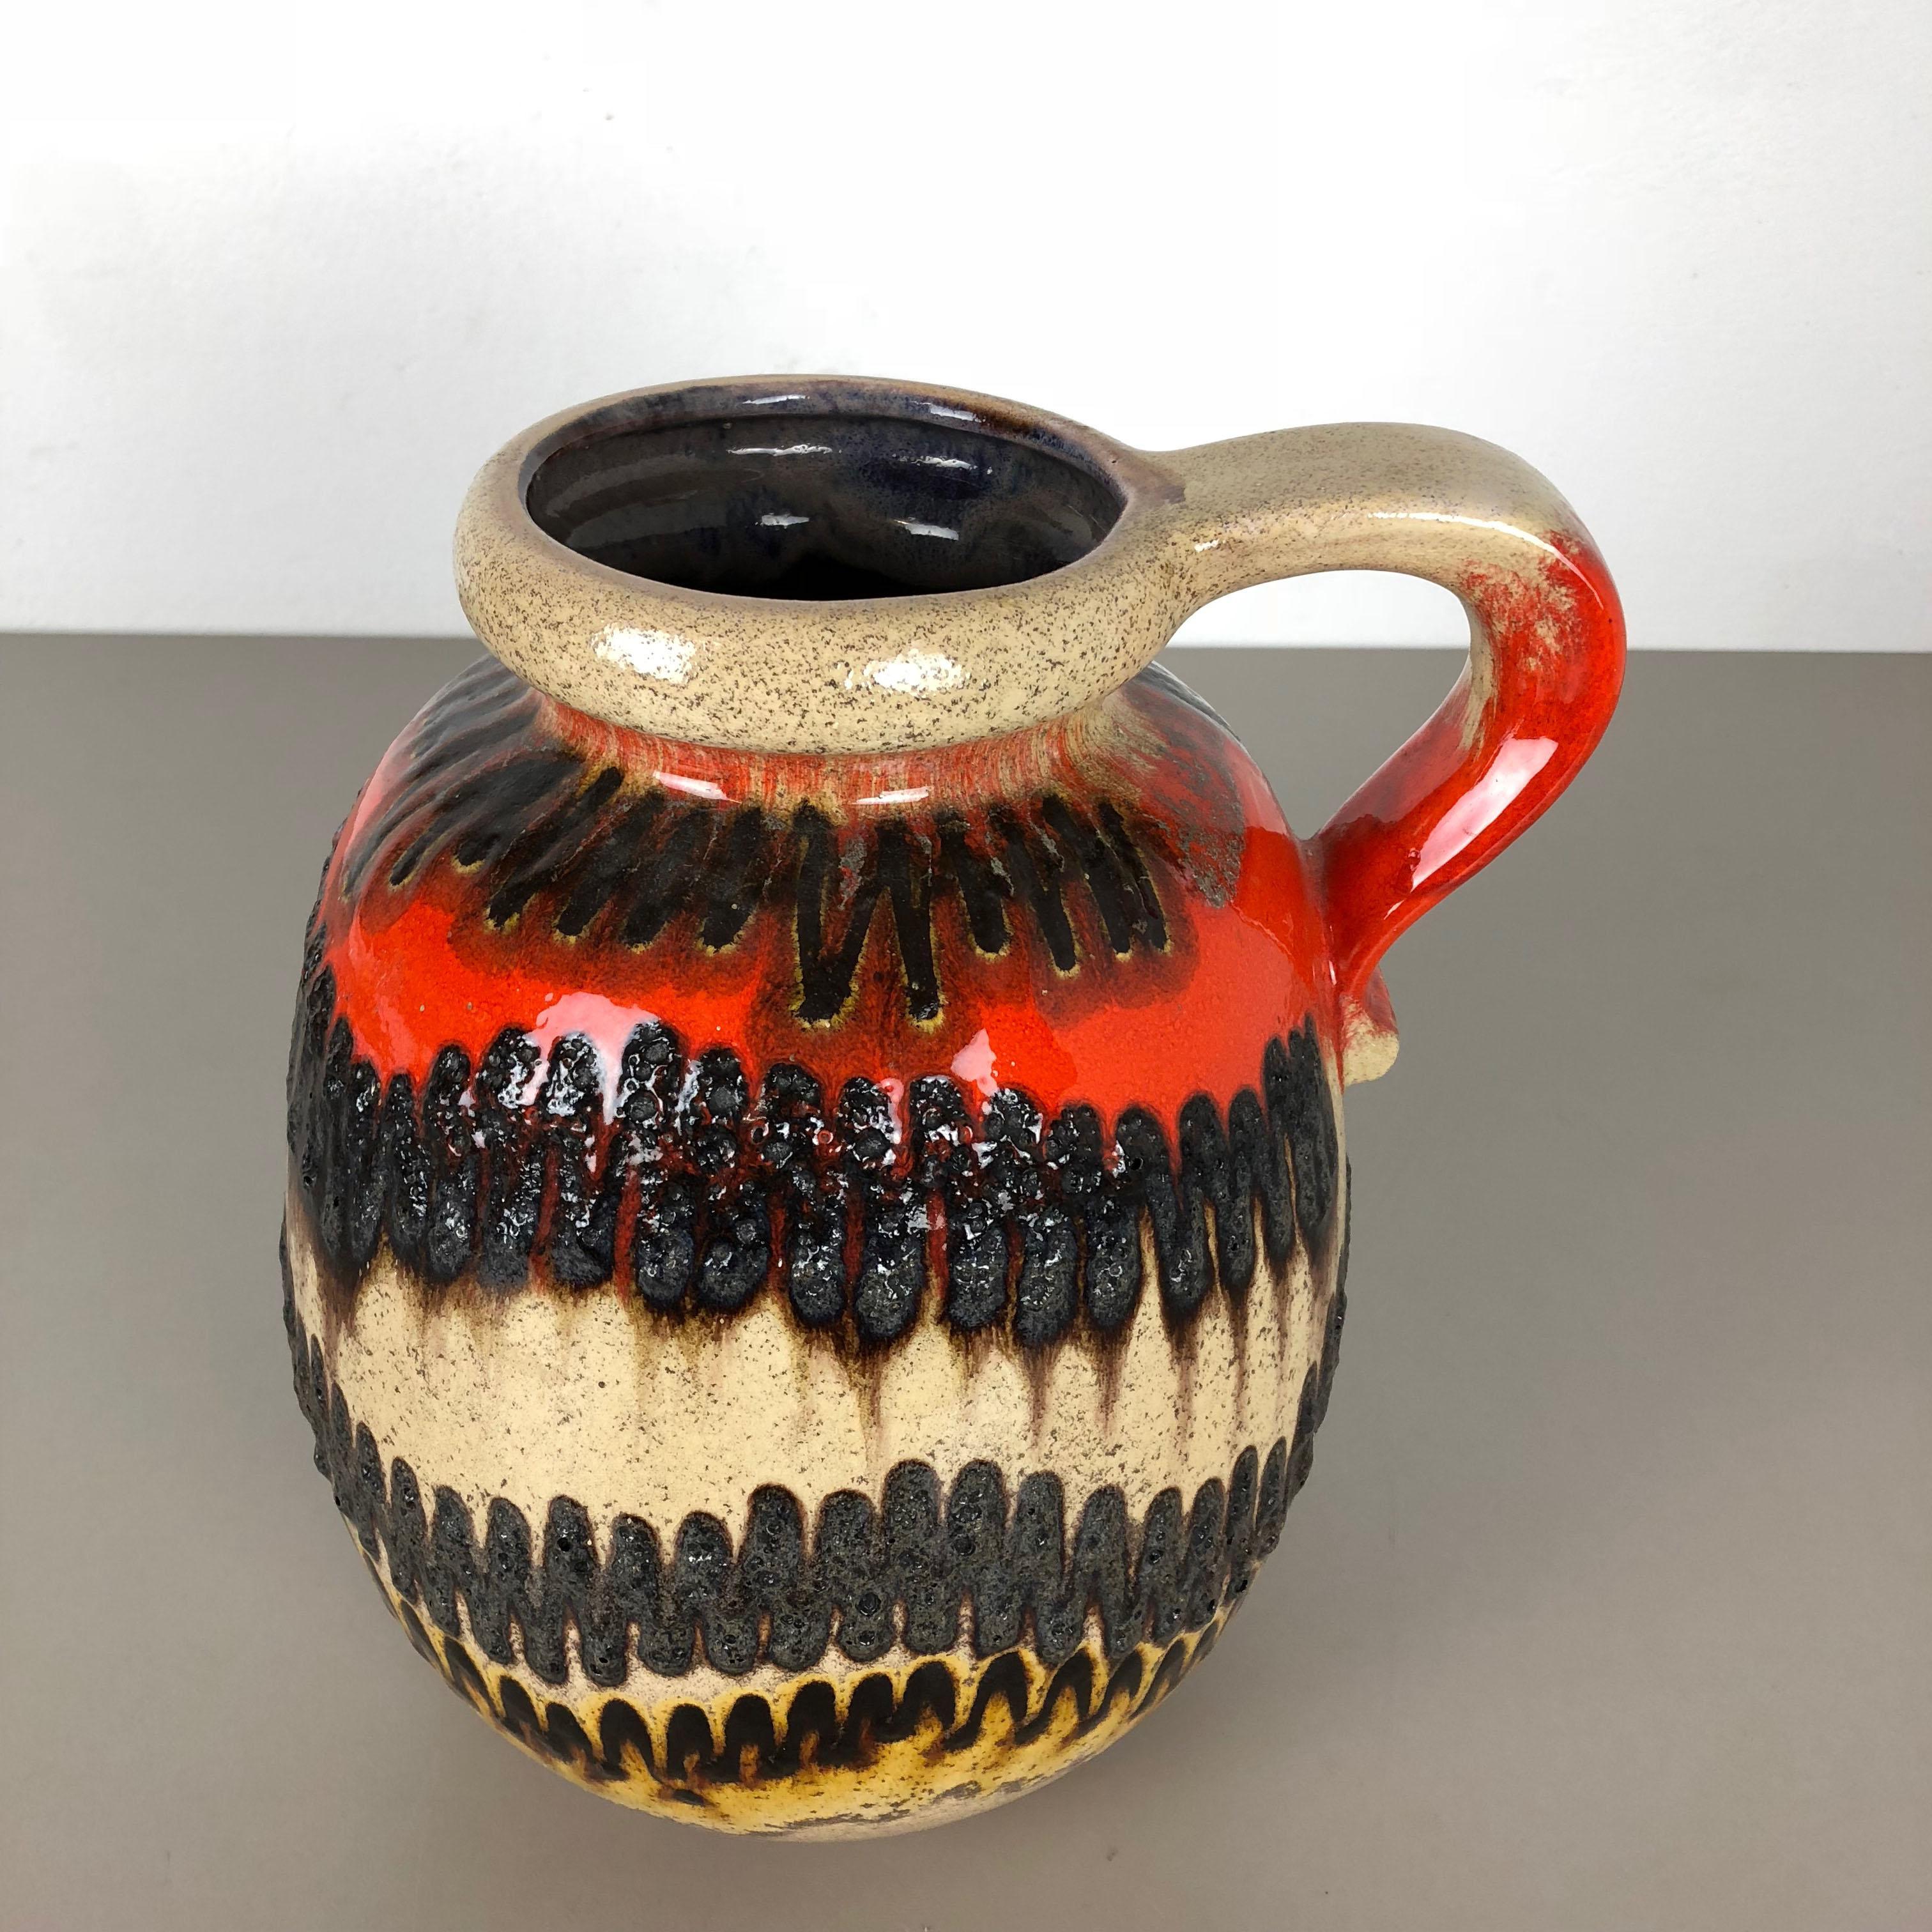 Article:

Fat lava art vase extra large version


Model: 484-30


Producer:

Scheurich, Germany



Decade:

1970s




This original vintage vase was produced in the 1970s in Germany. It is made of ceramic pottery in fat lava